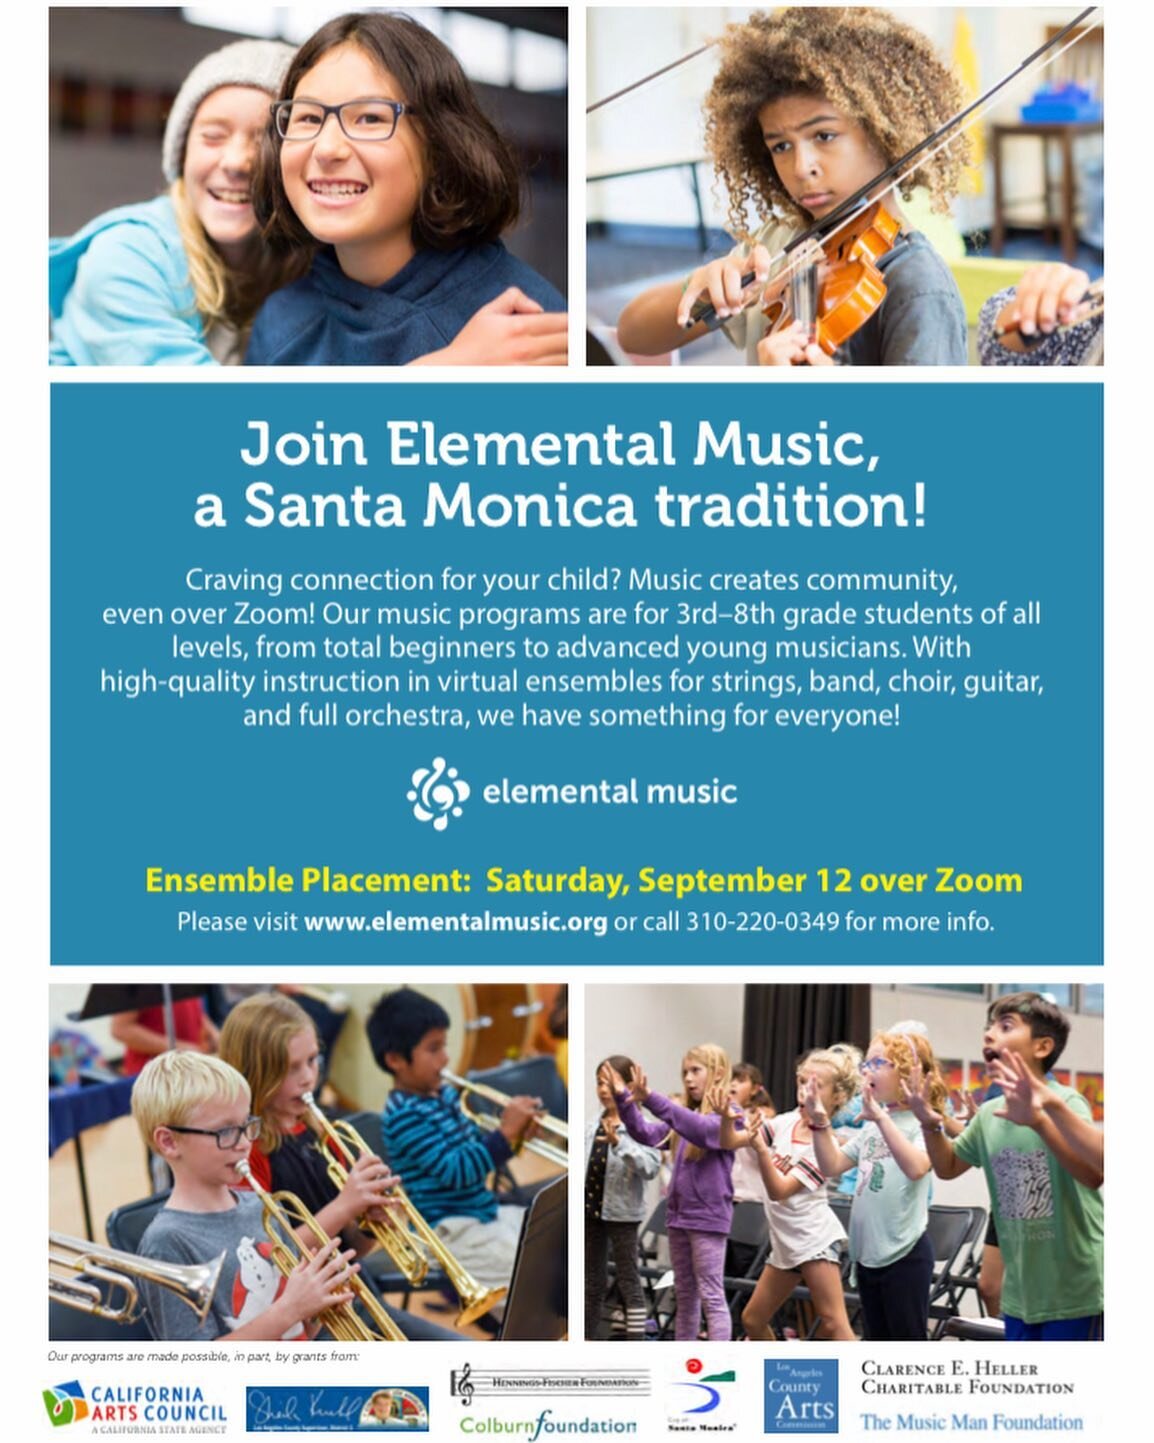 Looking for a creative outlet for your child this year? 🔎 Look no further! 
.
Elemental Music's after-school music ensembles give kids 💥an hour of weekly Zoom instruction with inspiring teachers, plus 💥play-along videos for guided practice at home